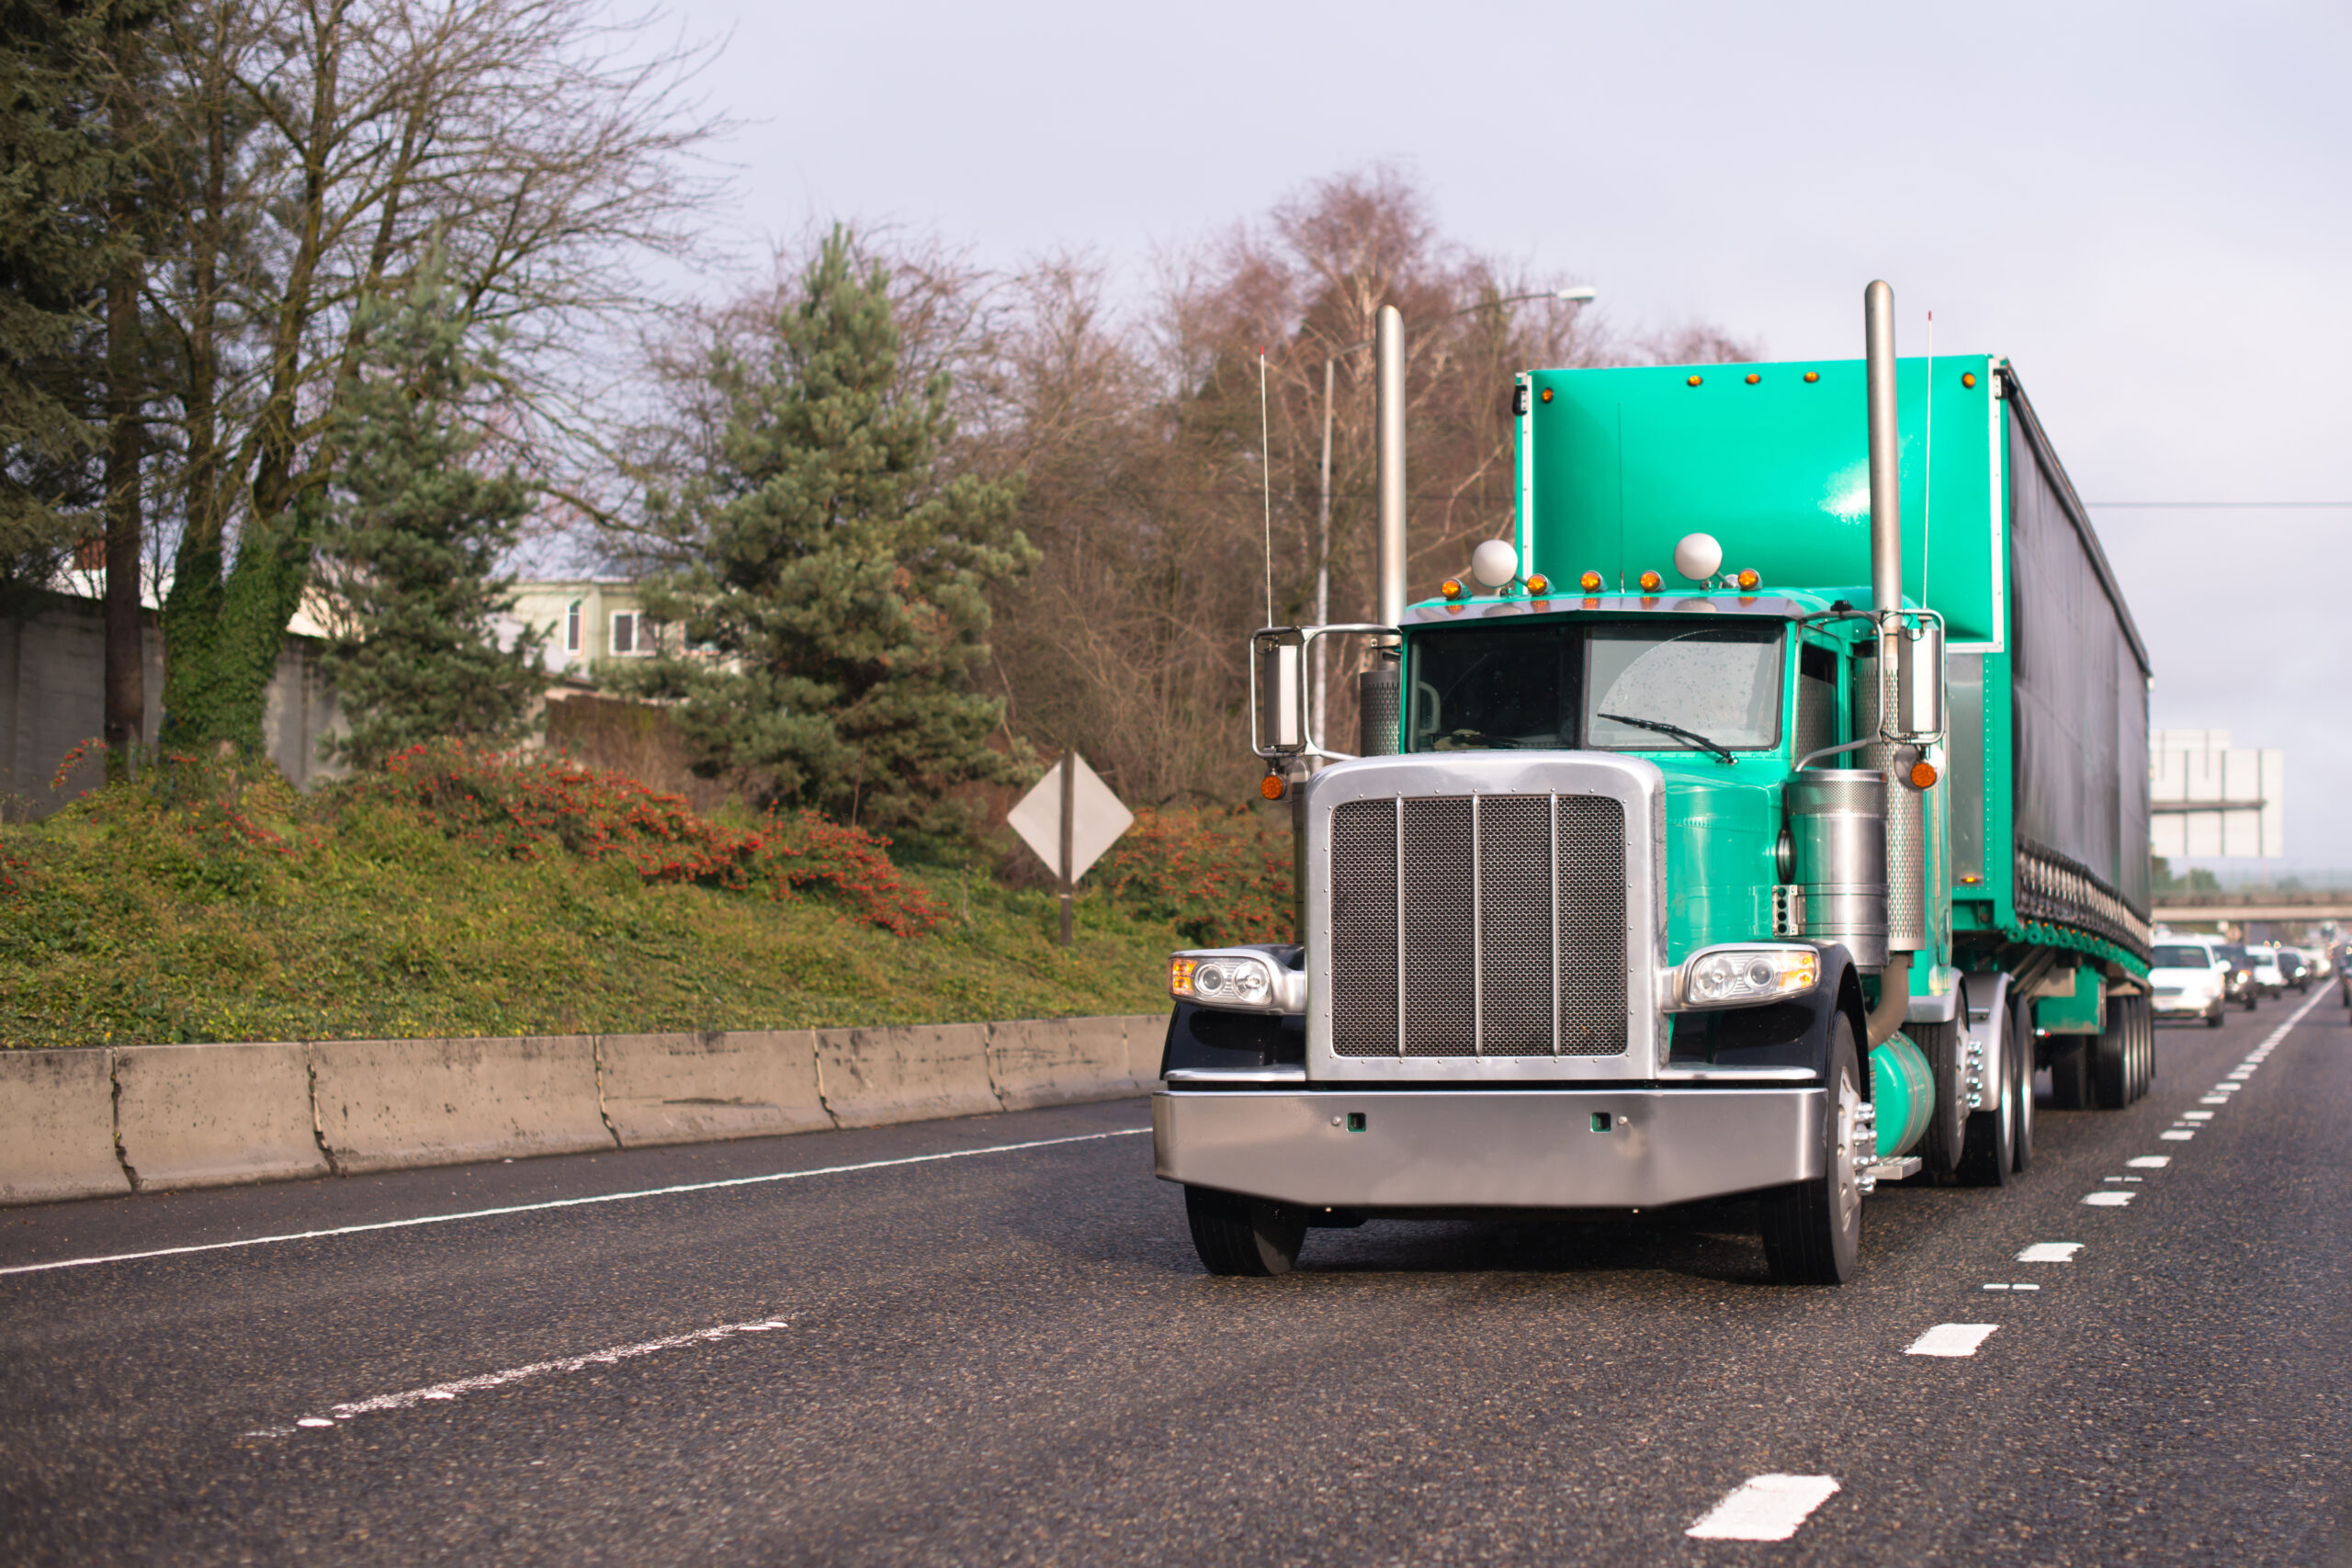 Off-Lease Used Class 8 Truck Sales Continue to Increase